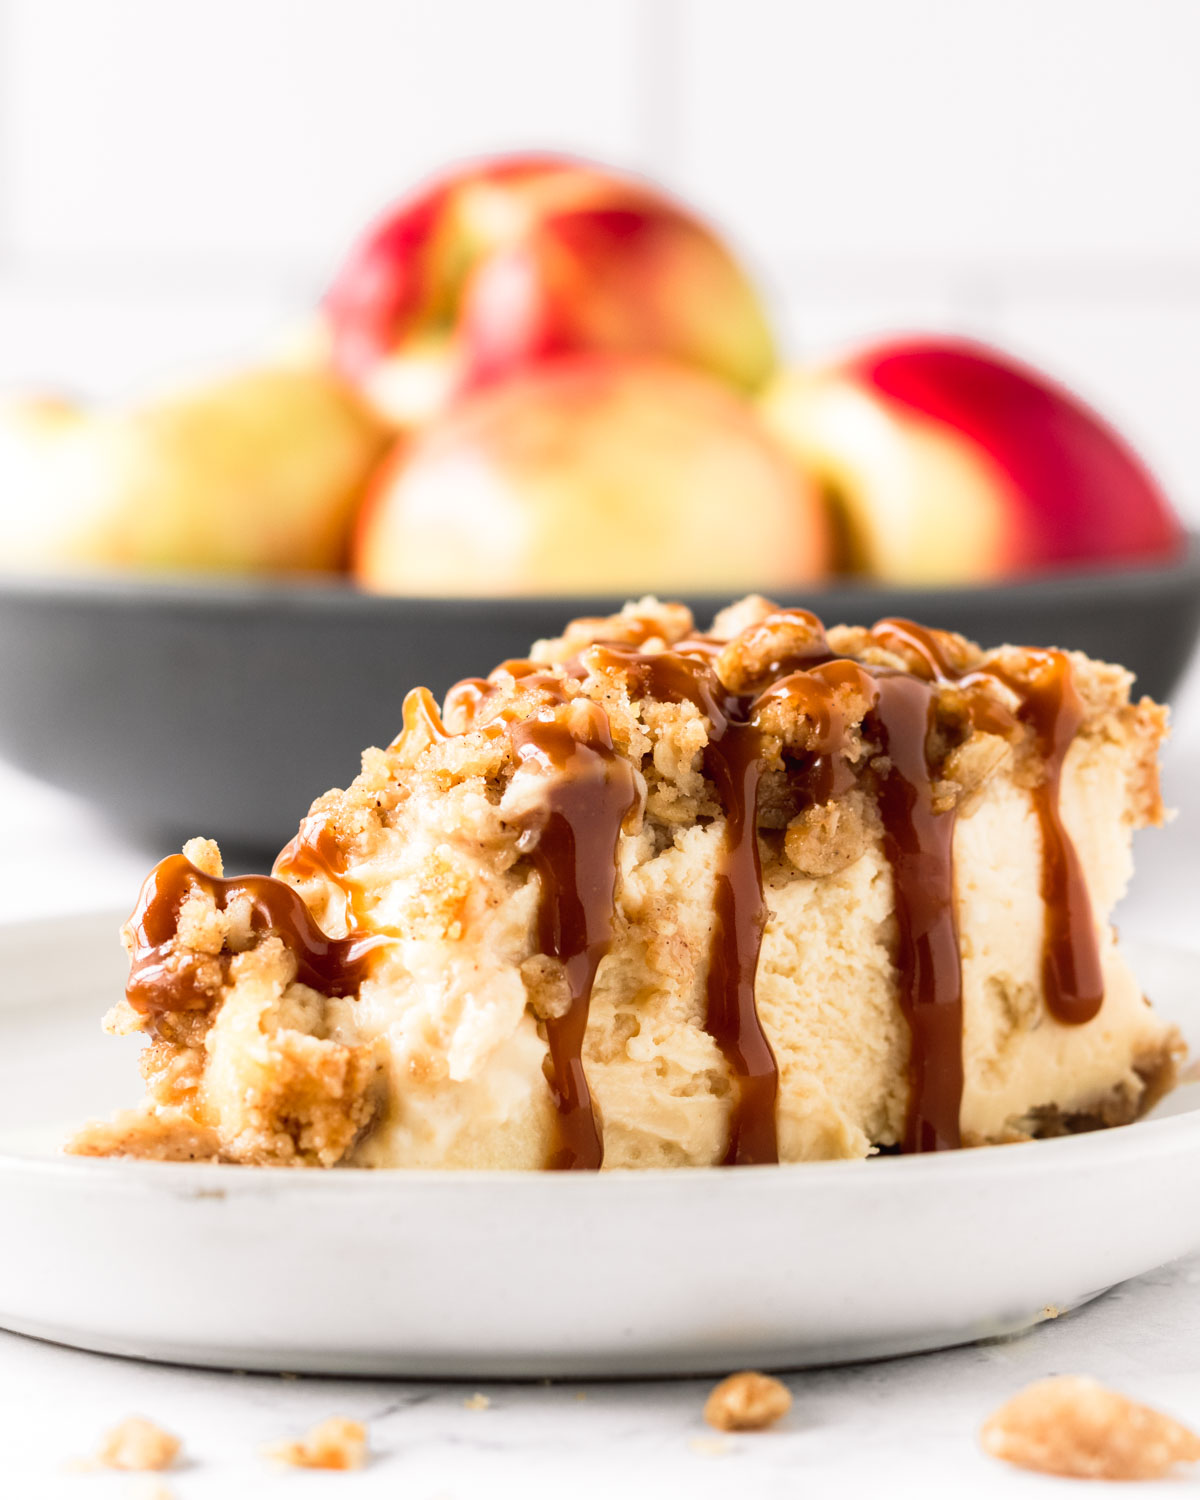 Slice of caramel apple crumble cheesecake with a bowl of apples in the background.